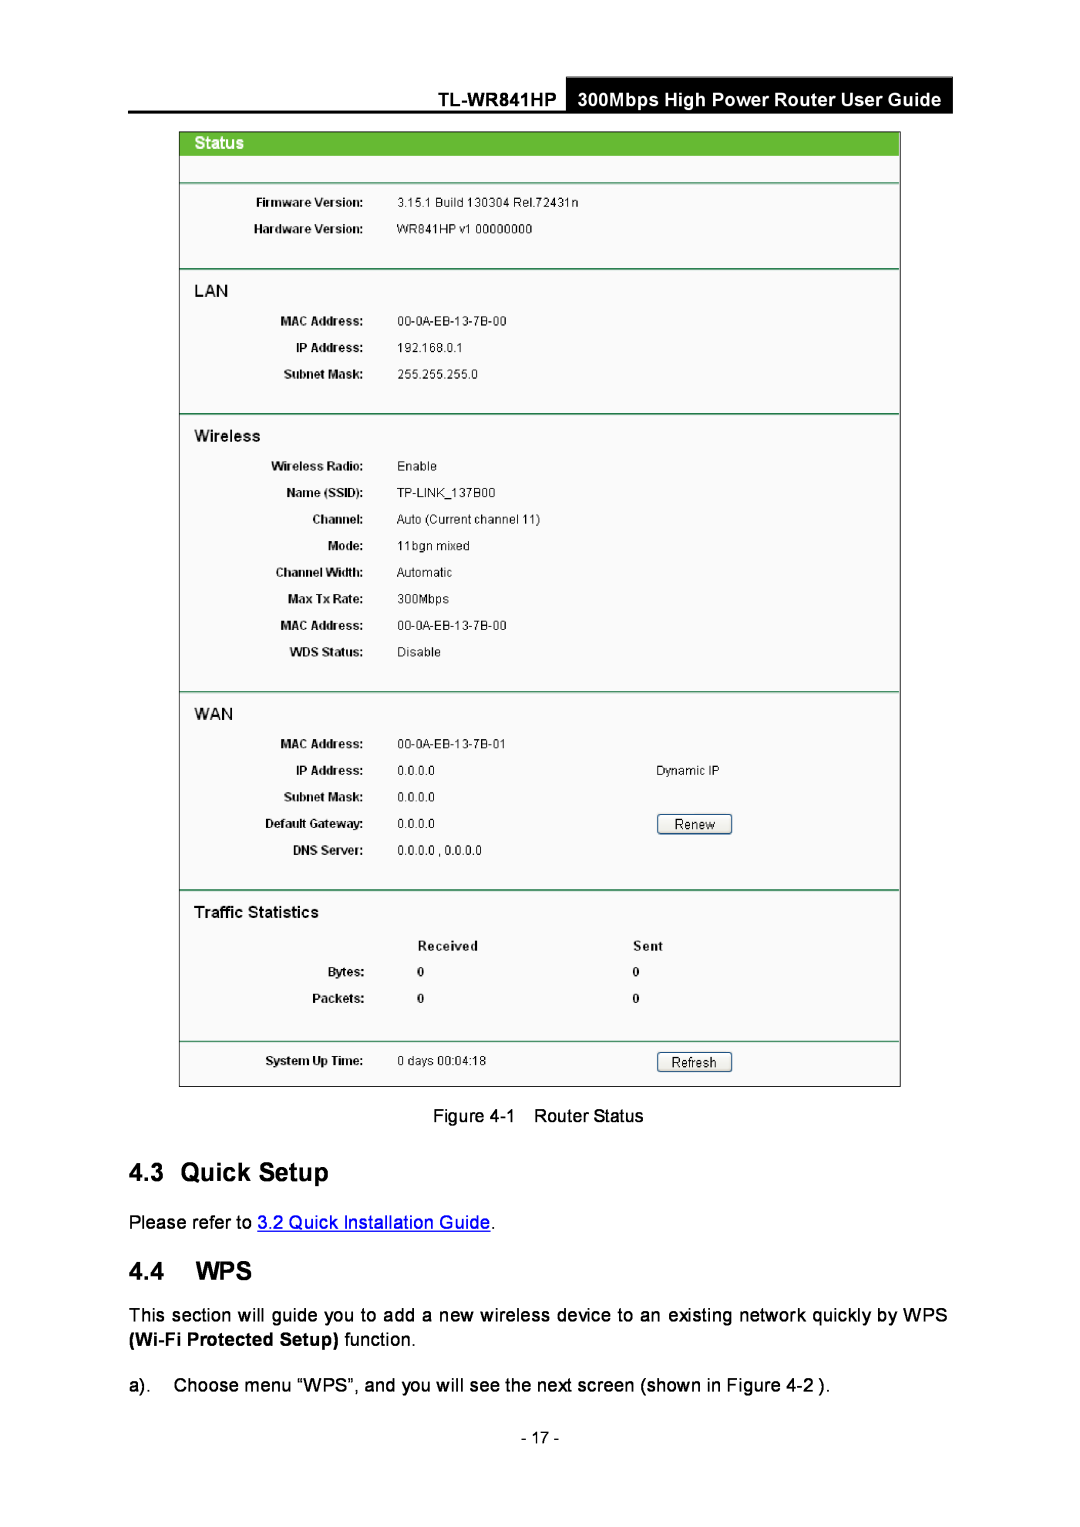 TP-Link Rev 1.0.0 1910010810 manual Quick Setup, 4.4 WPS, Please refer to 3.2 Quick Installation Guide, 1 Router Status 